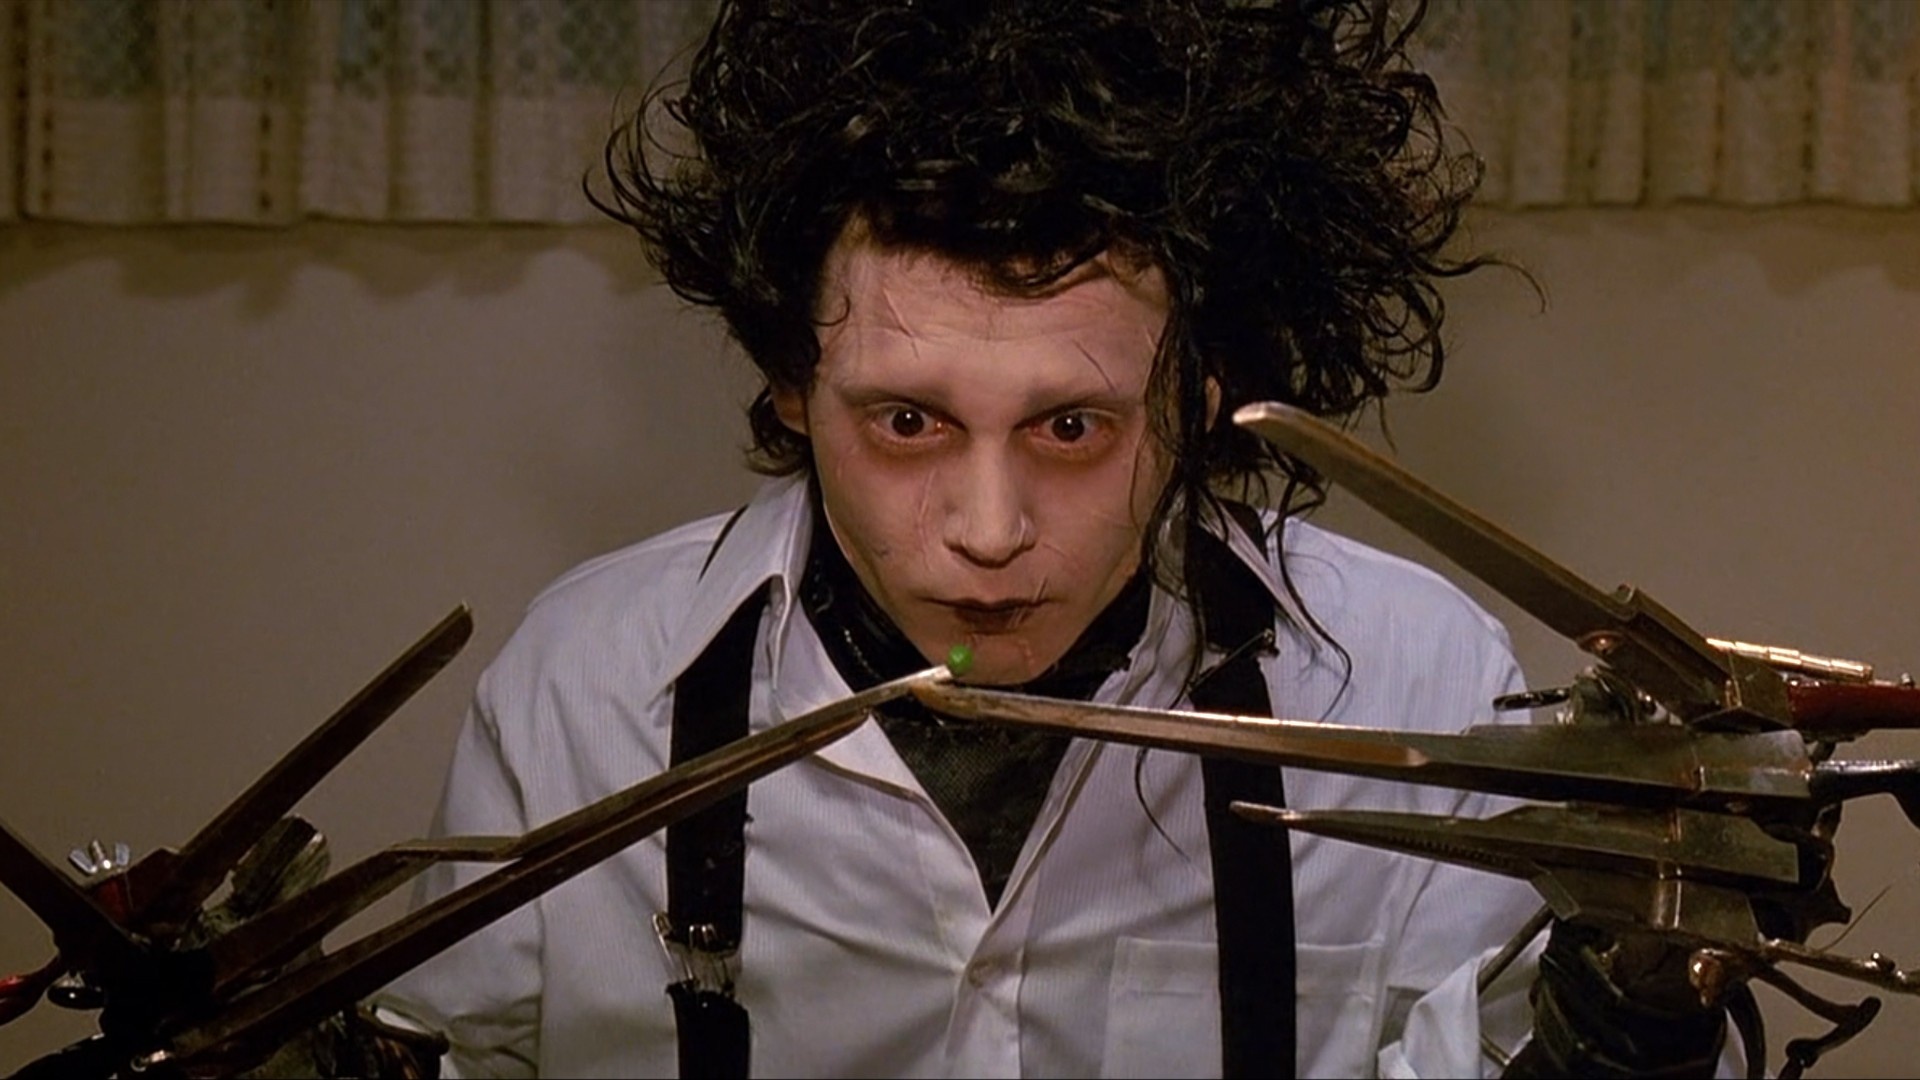 Edward Scissorhands: The story of a young man who was created by a kindly scientist who wanted to find a way to animate a humanoid. 1920x1080 Full HD Background.